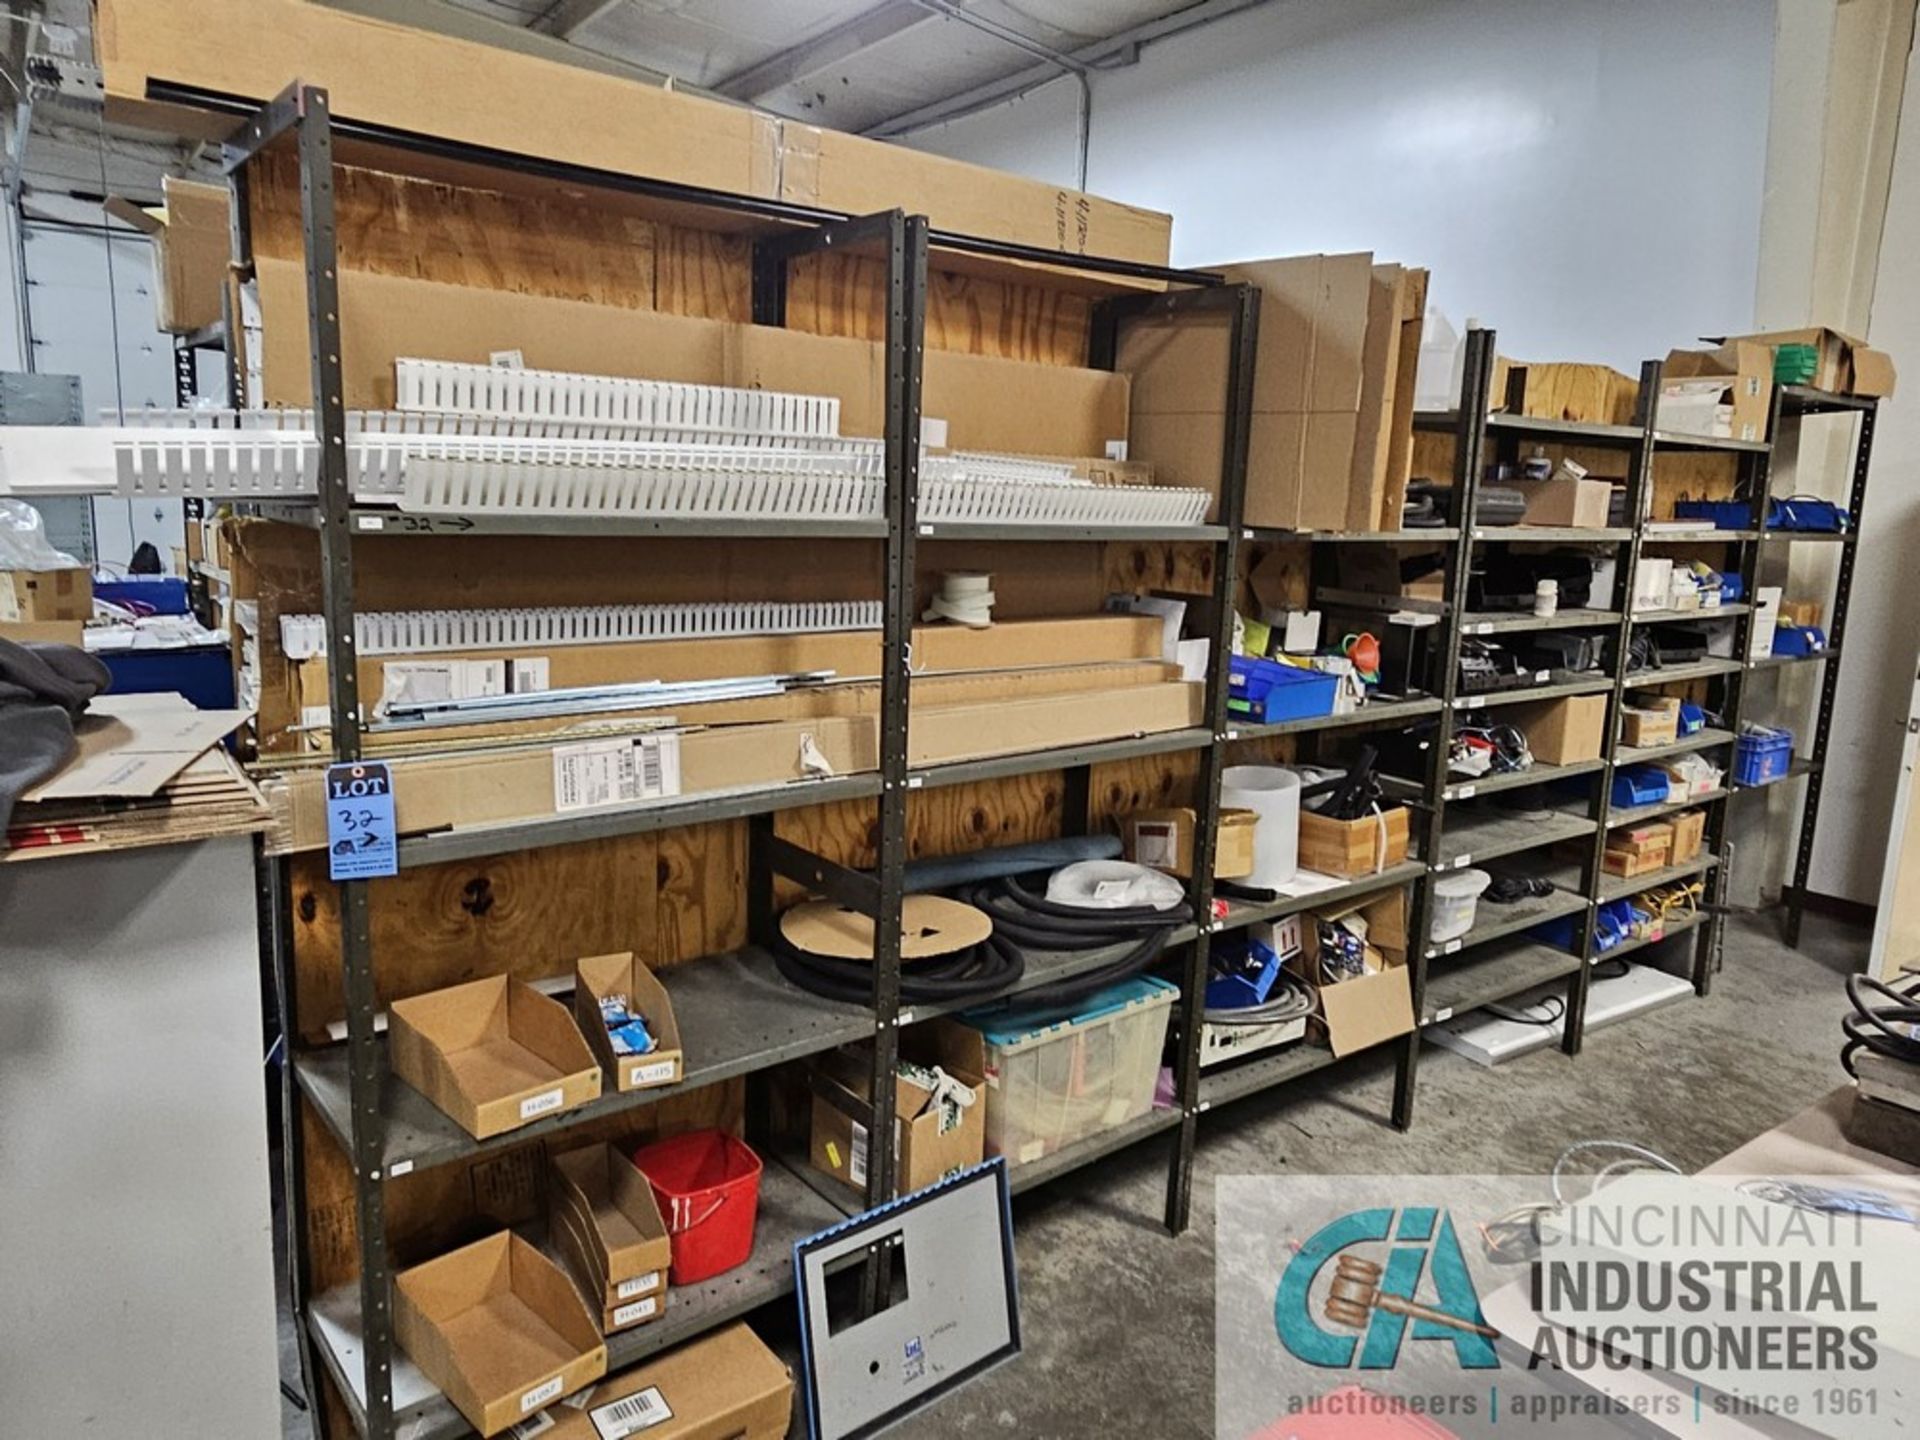 SECTIONS STEEL SHELVING WITH CONTENTS; ELECTRIC PARTS AND MISCELLANEOUS TOOLTEX ITEMS